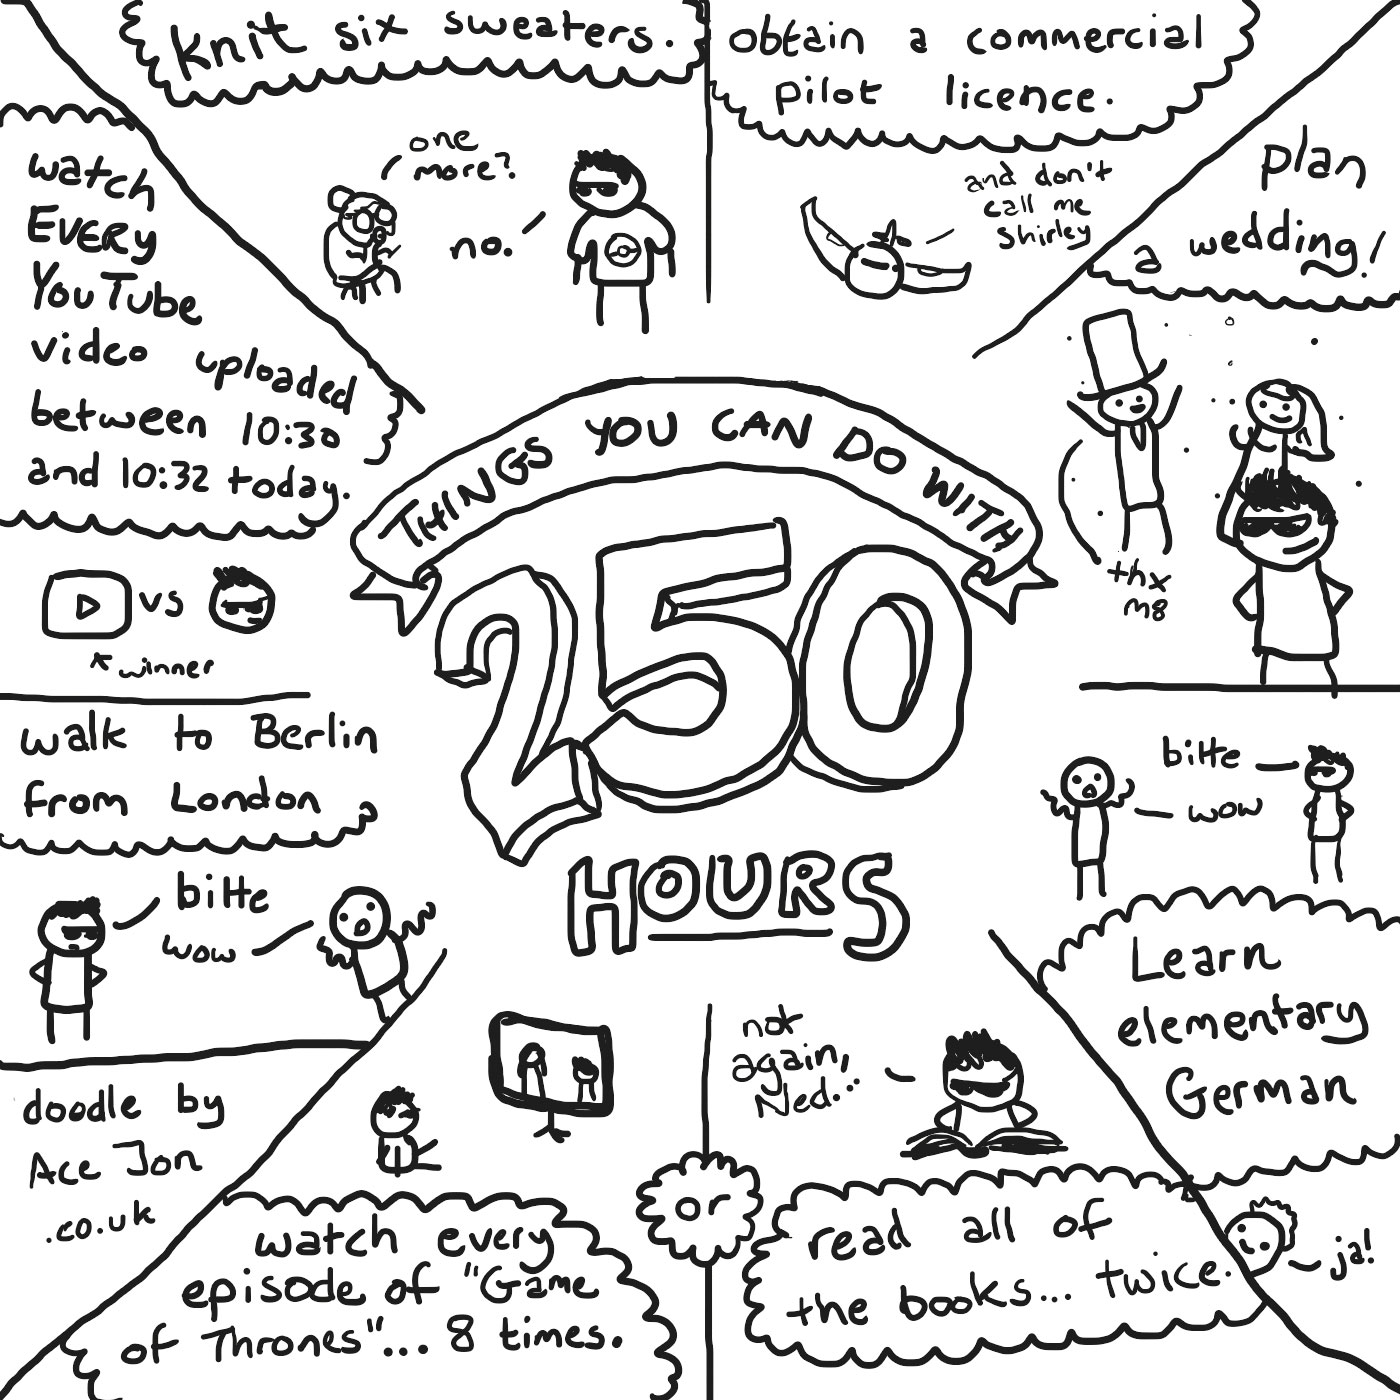 Things you can do with 250 hours